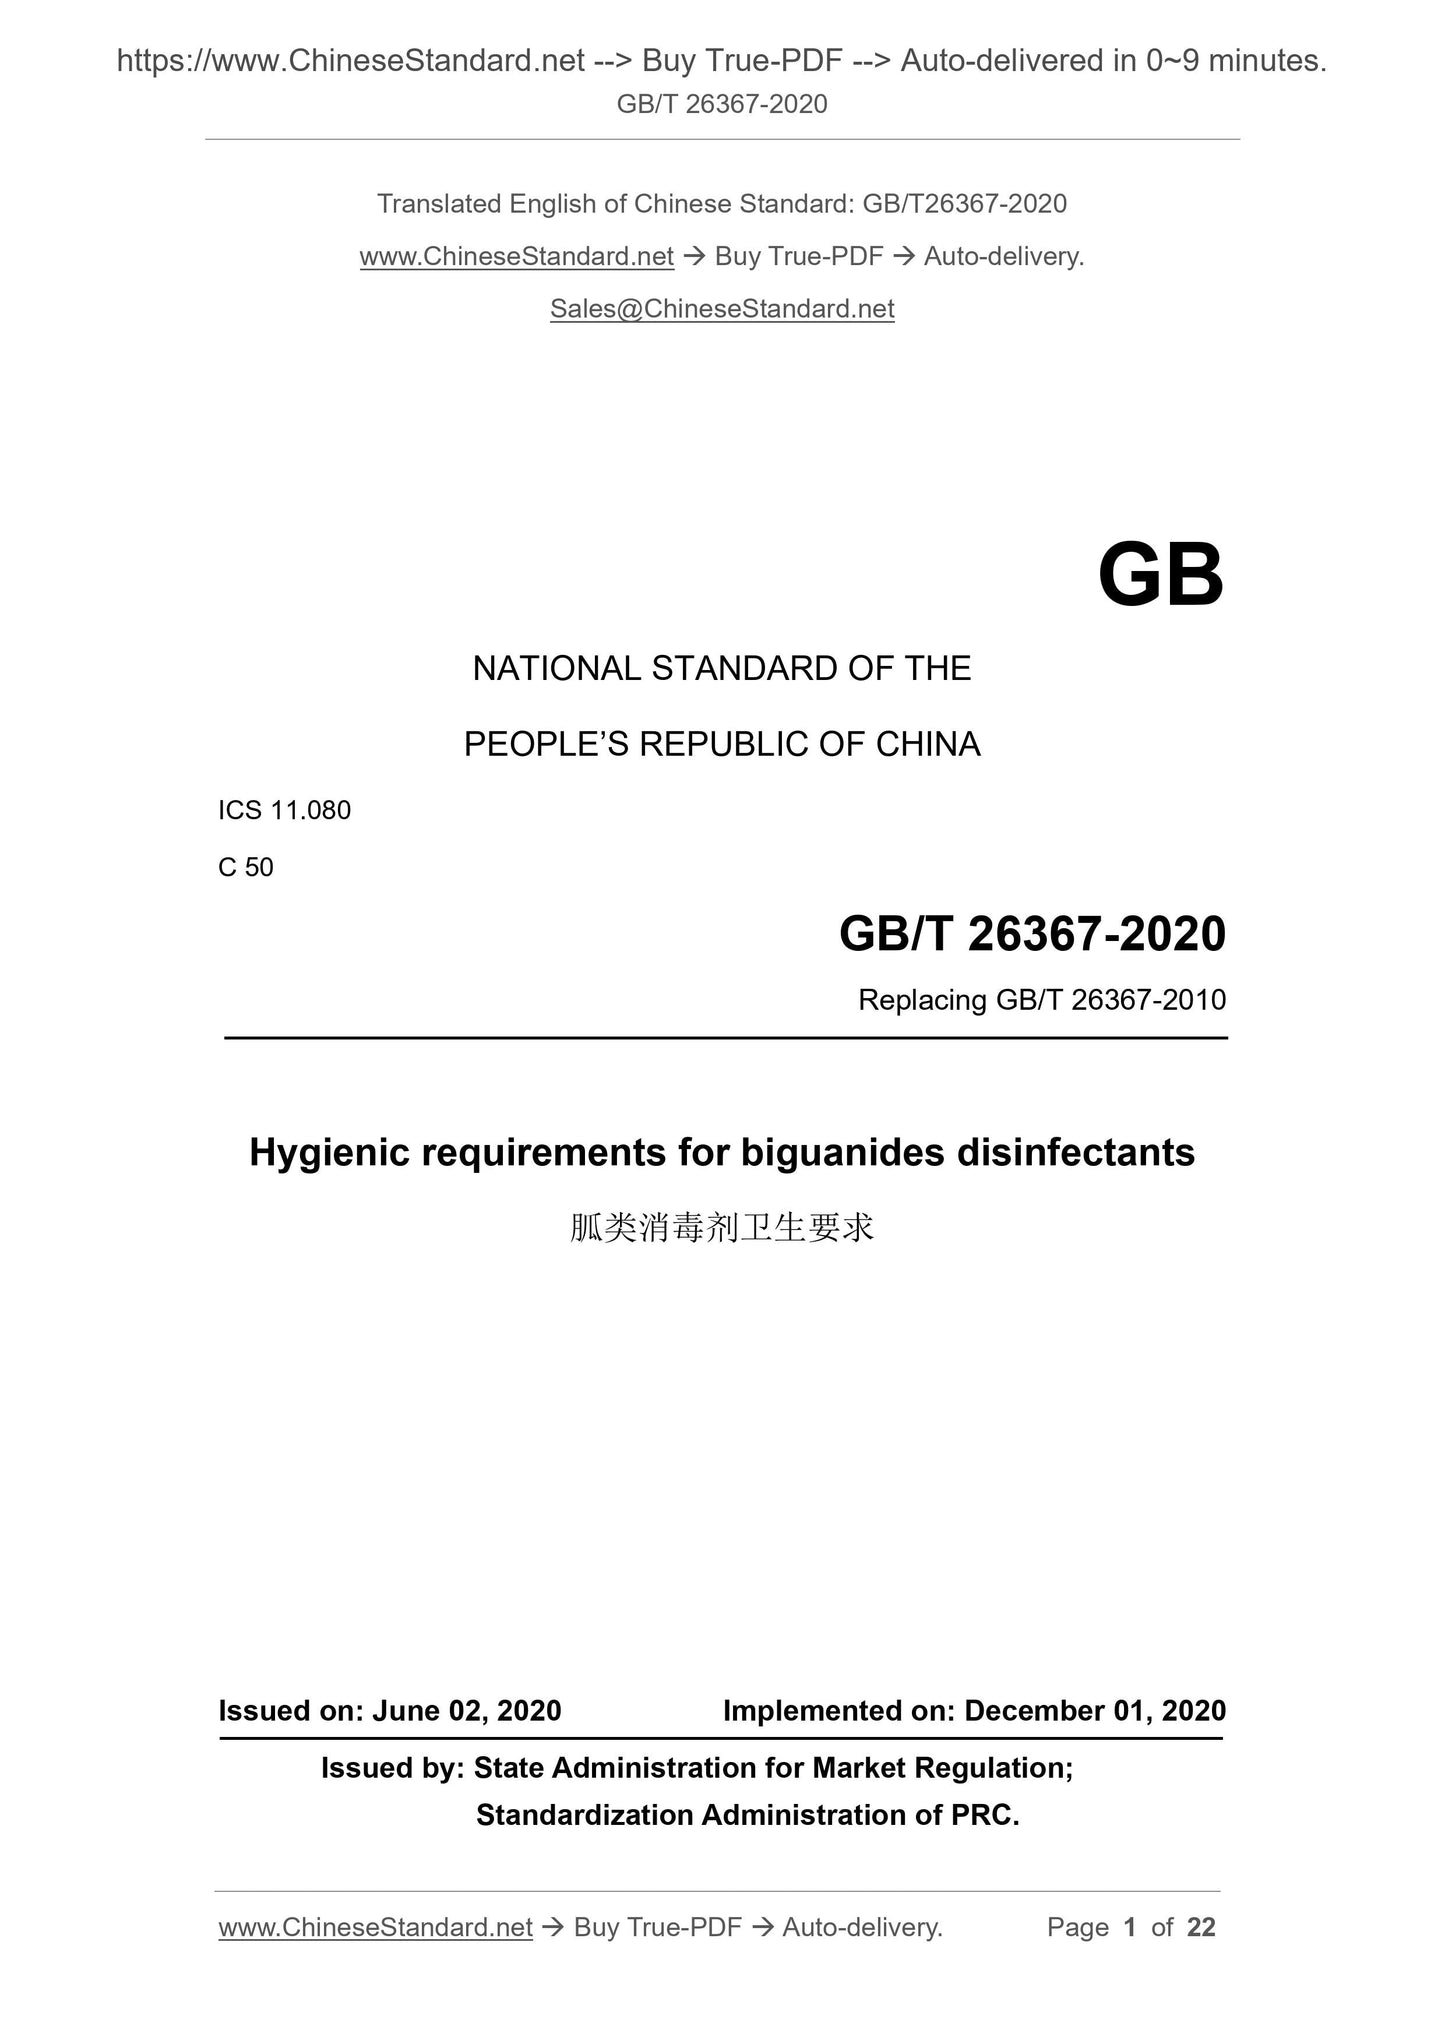 GB/T 26367-2020 Page 1